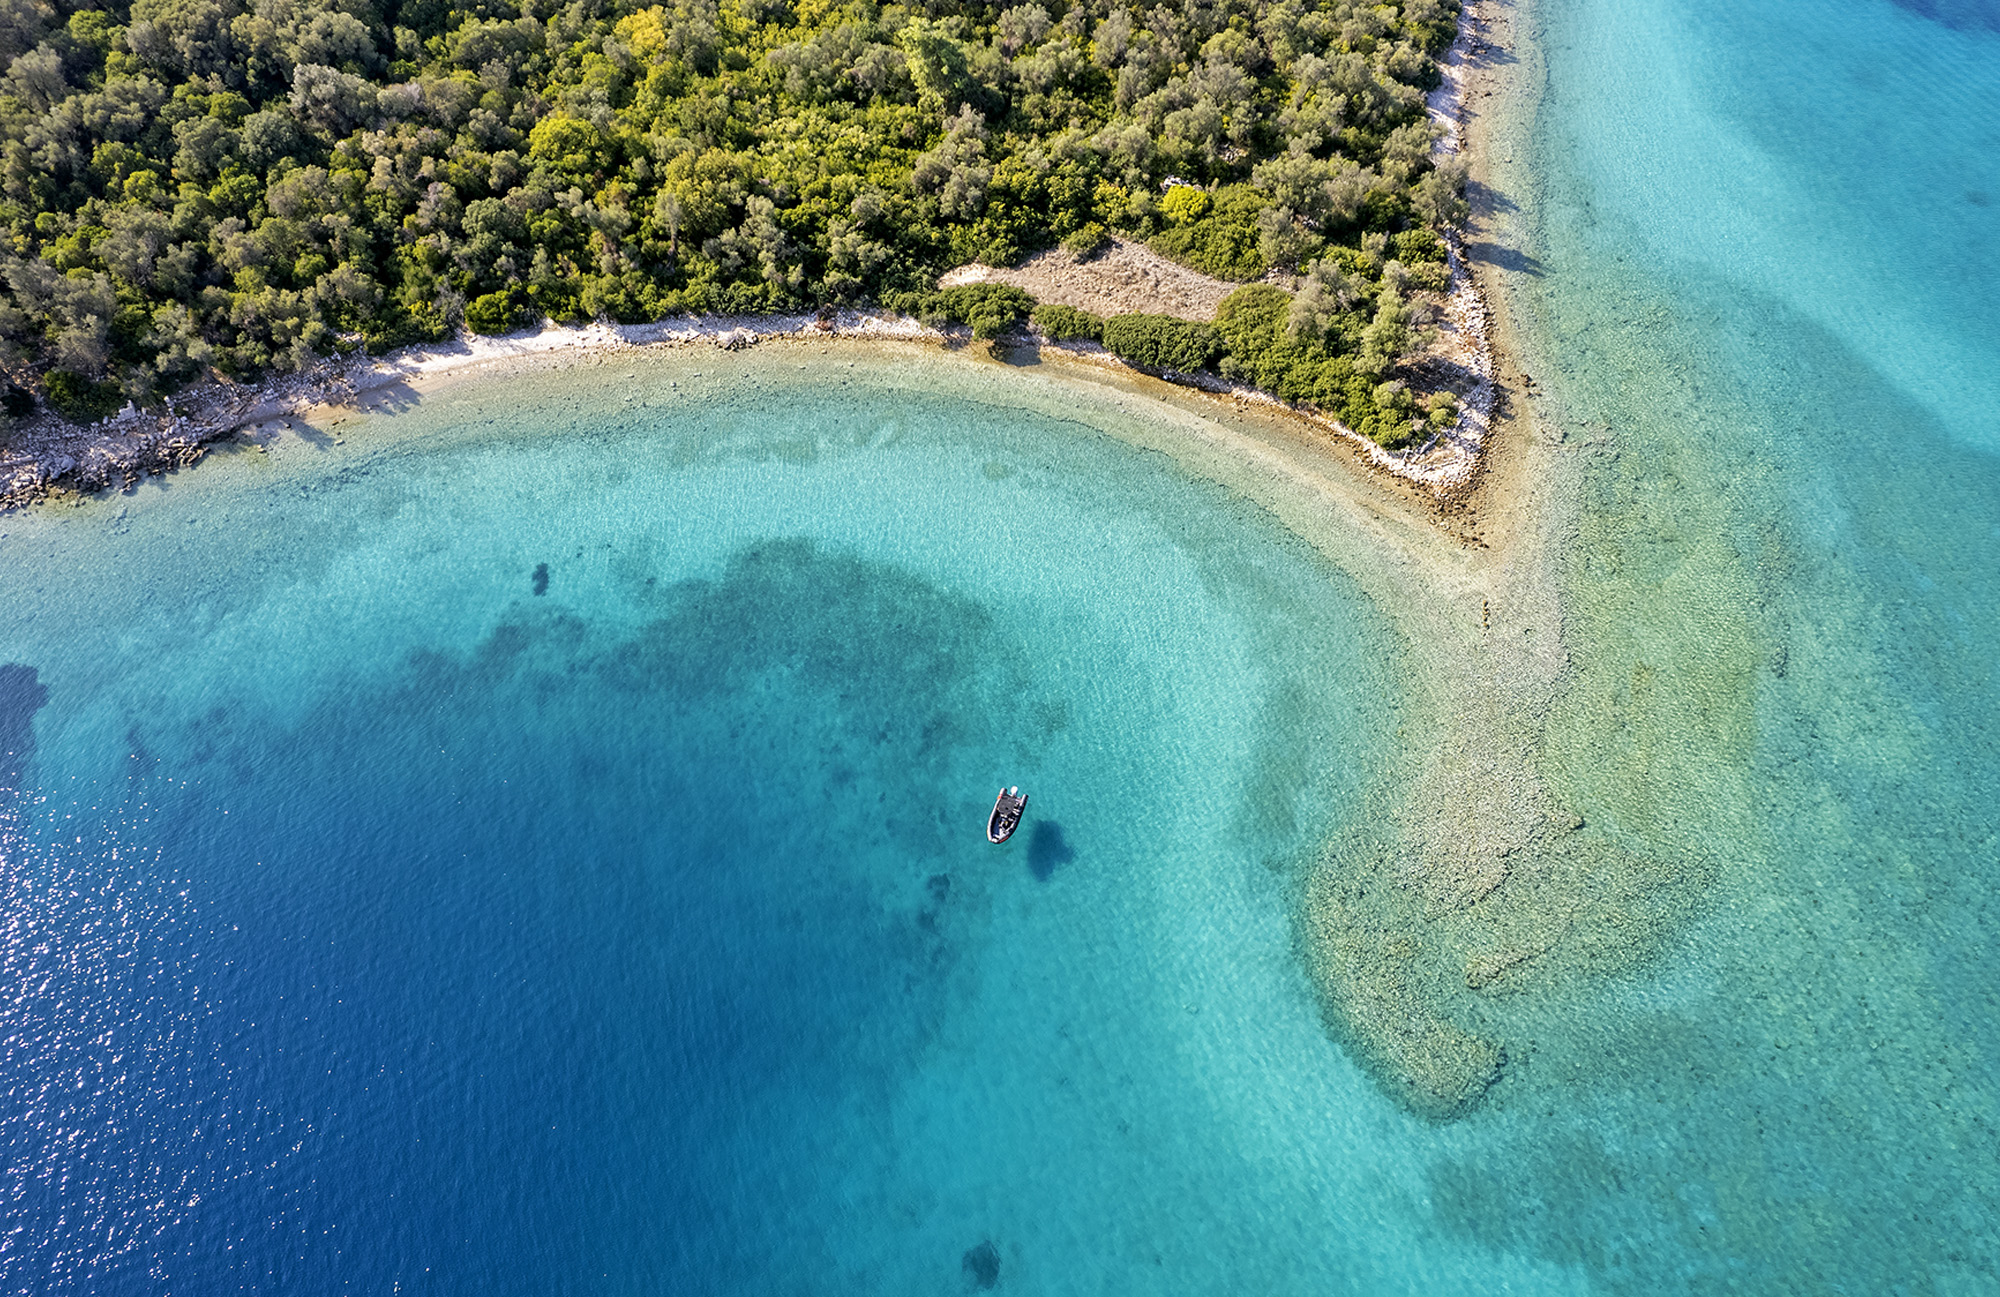 Aerial view of a green Turkish island with a boat in the water.